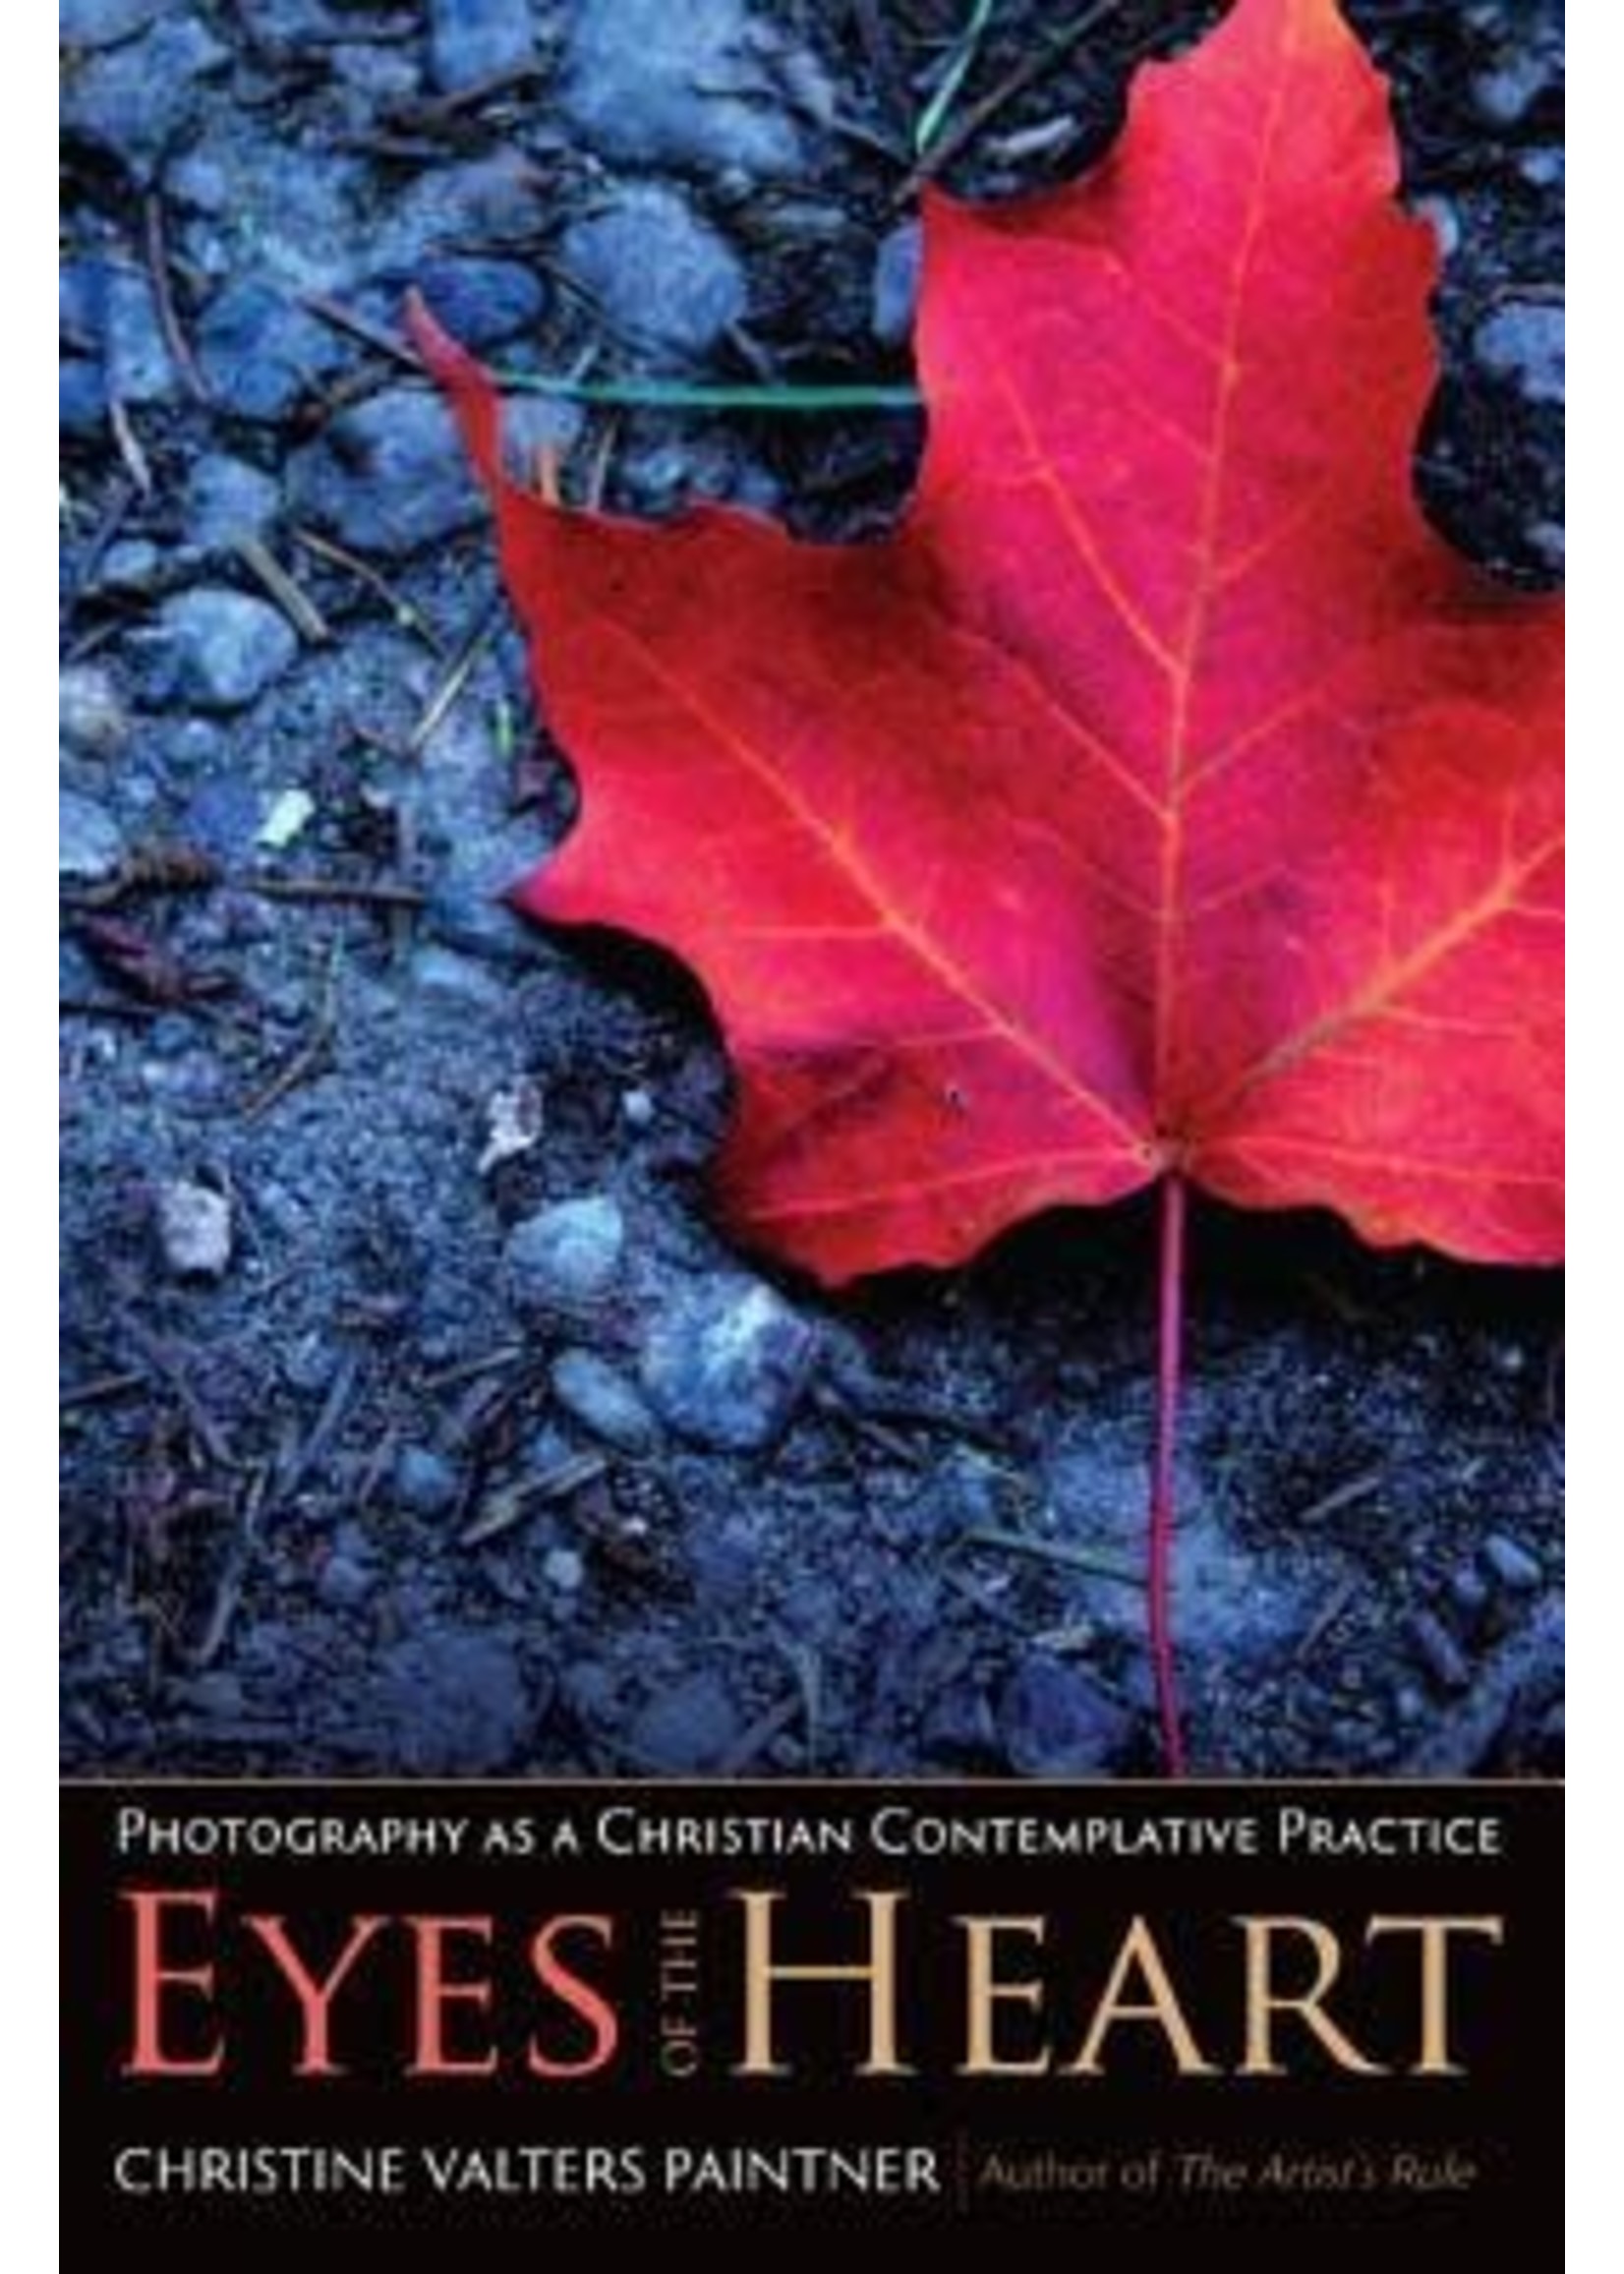 Eyes of the Heart: Photography as a Christian Contemplative Practice by Christine Valters Paintner